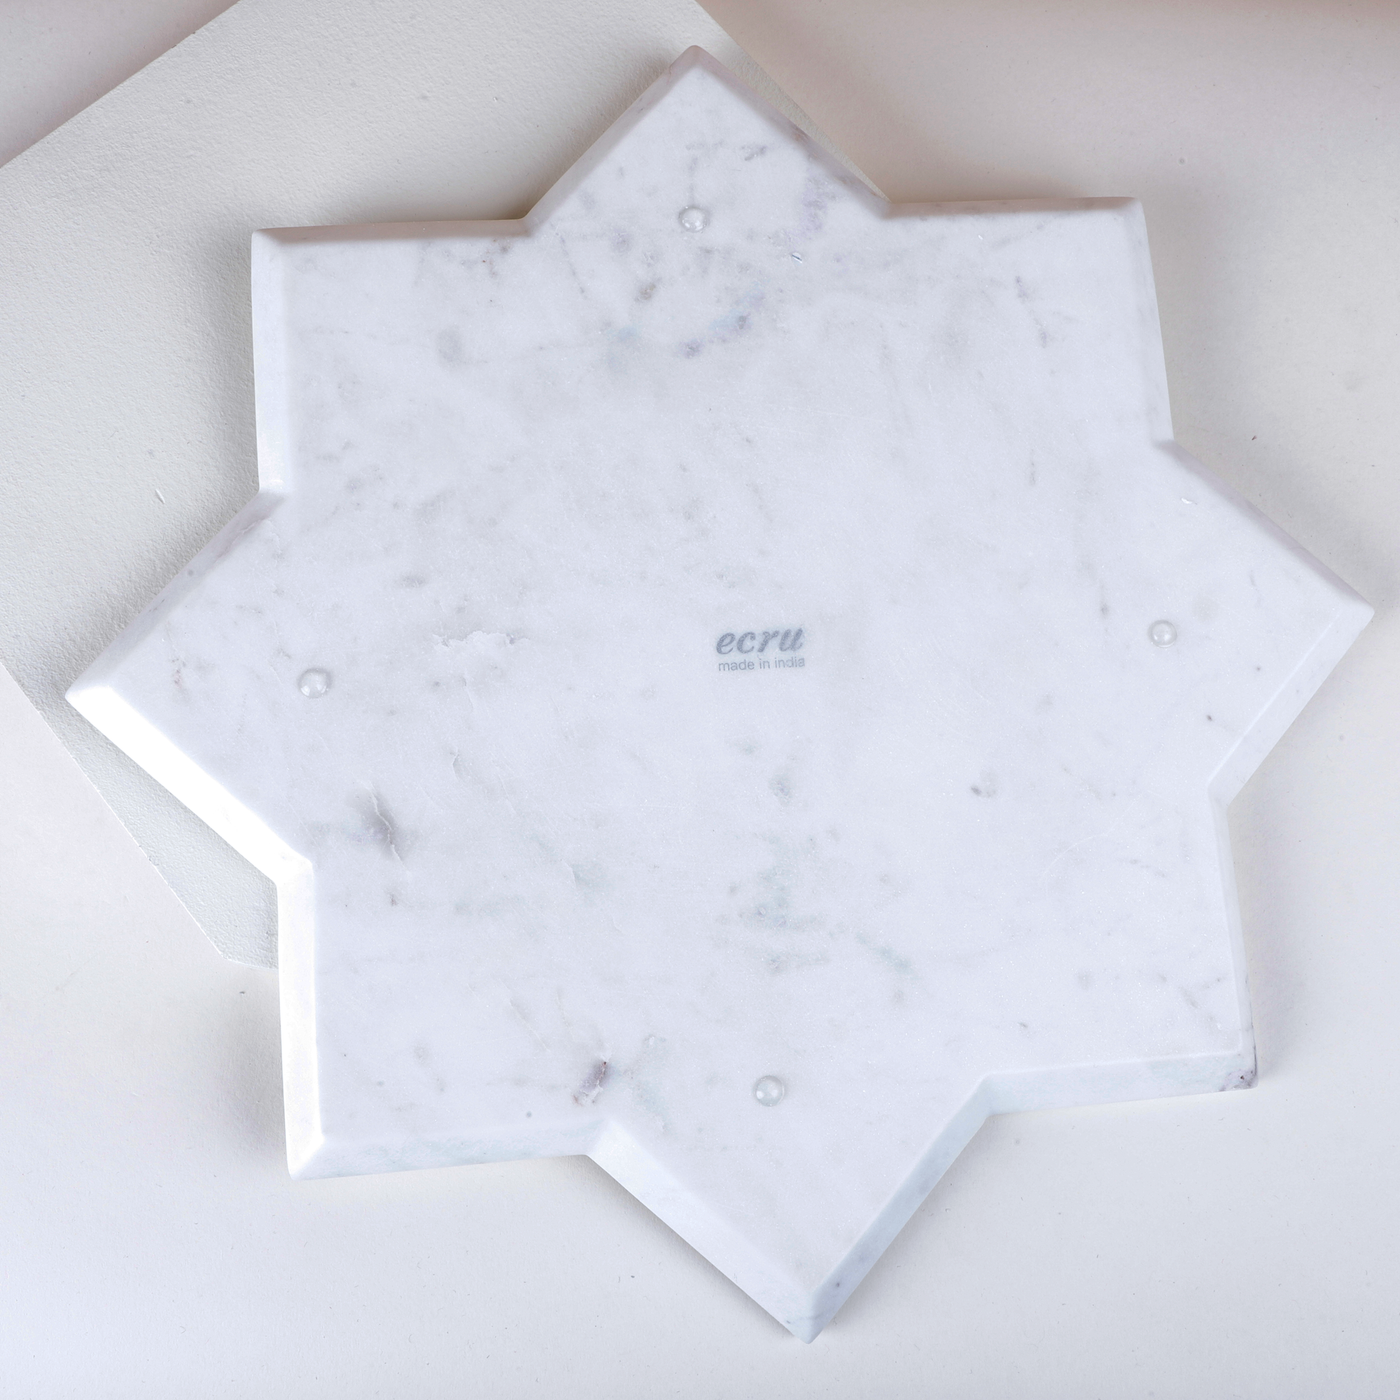 White Marble Star Plate